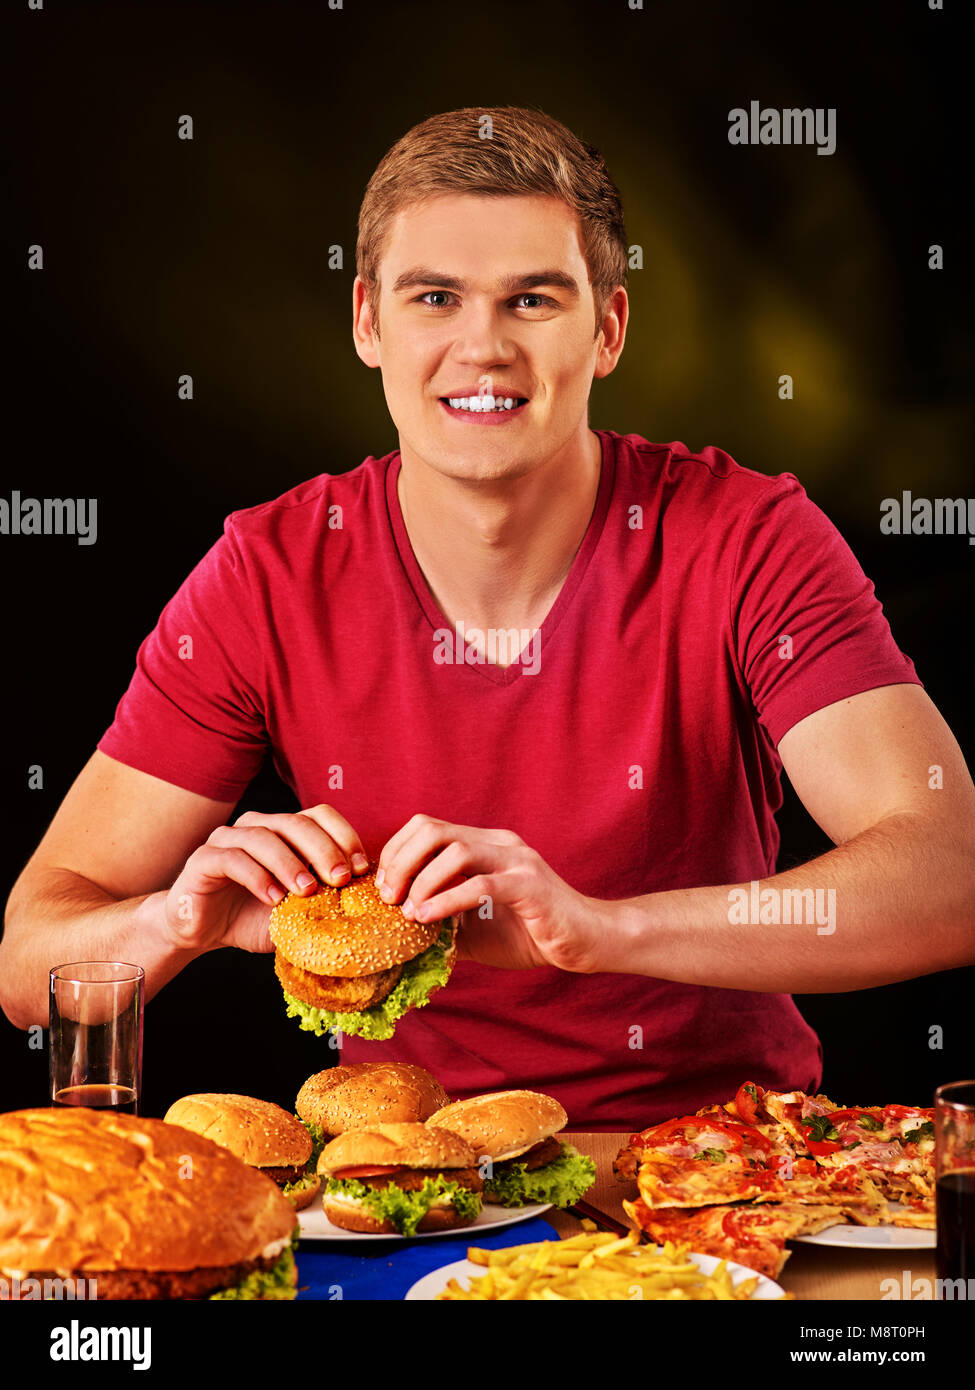 Woman eating french fries and hamburger on table. Stock Photo